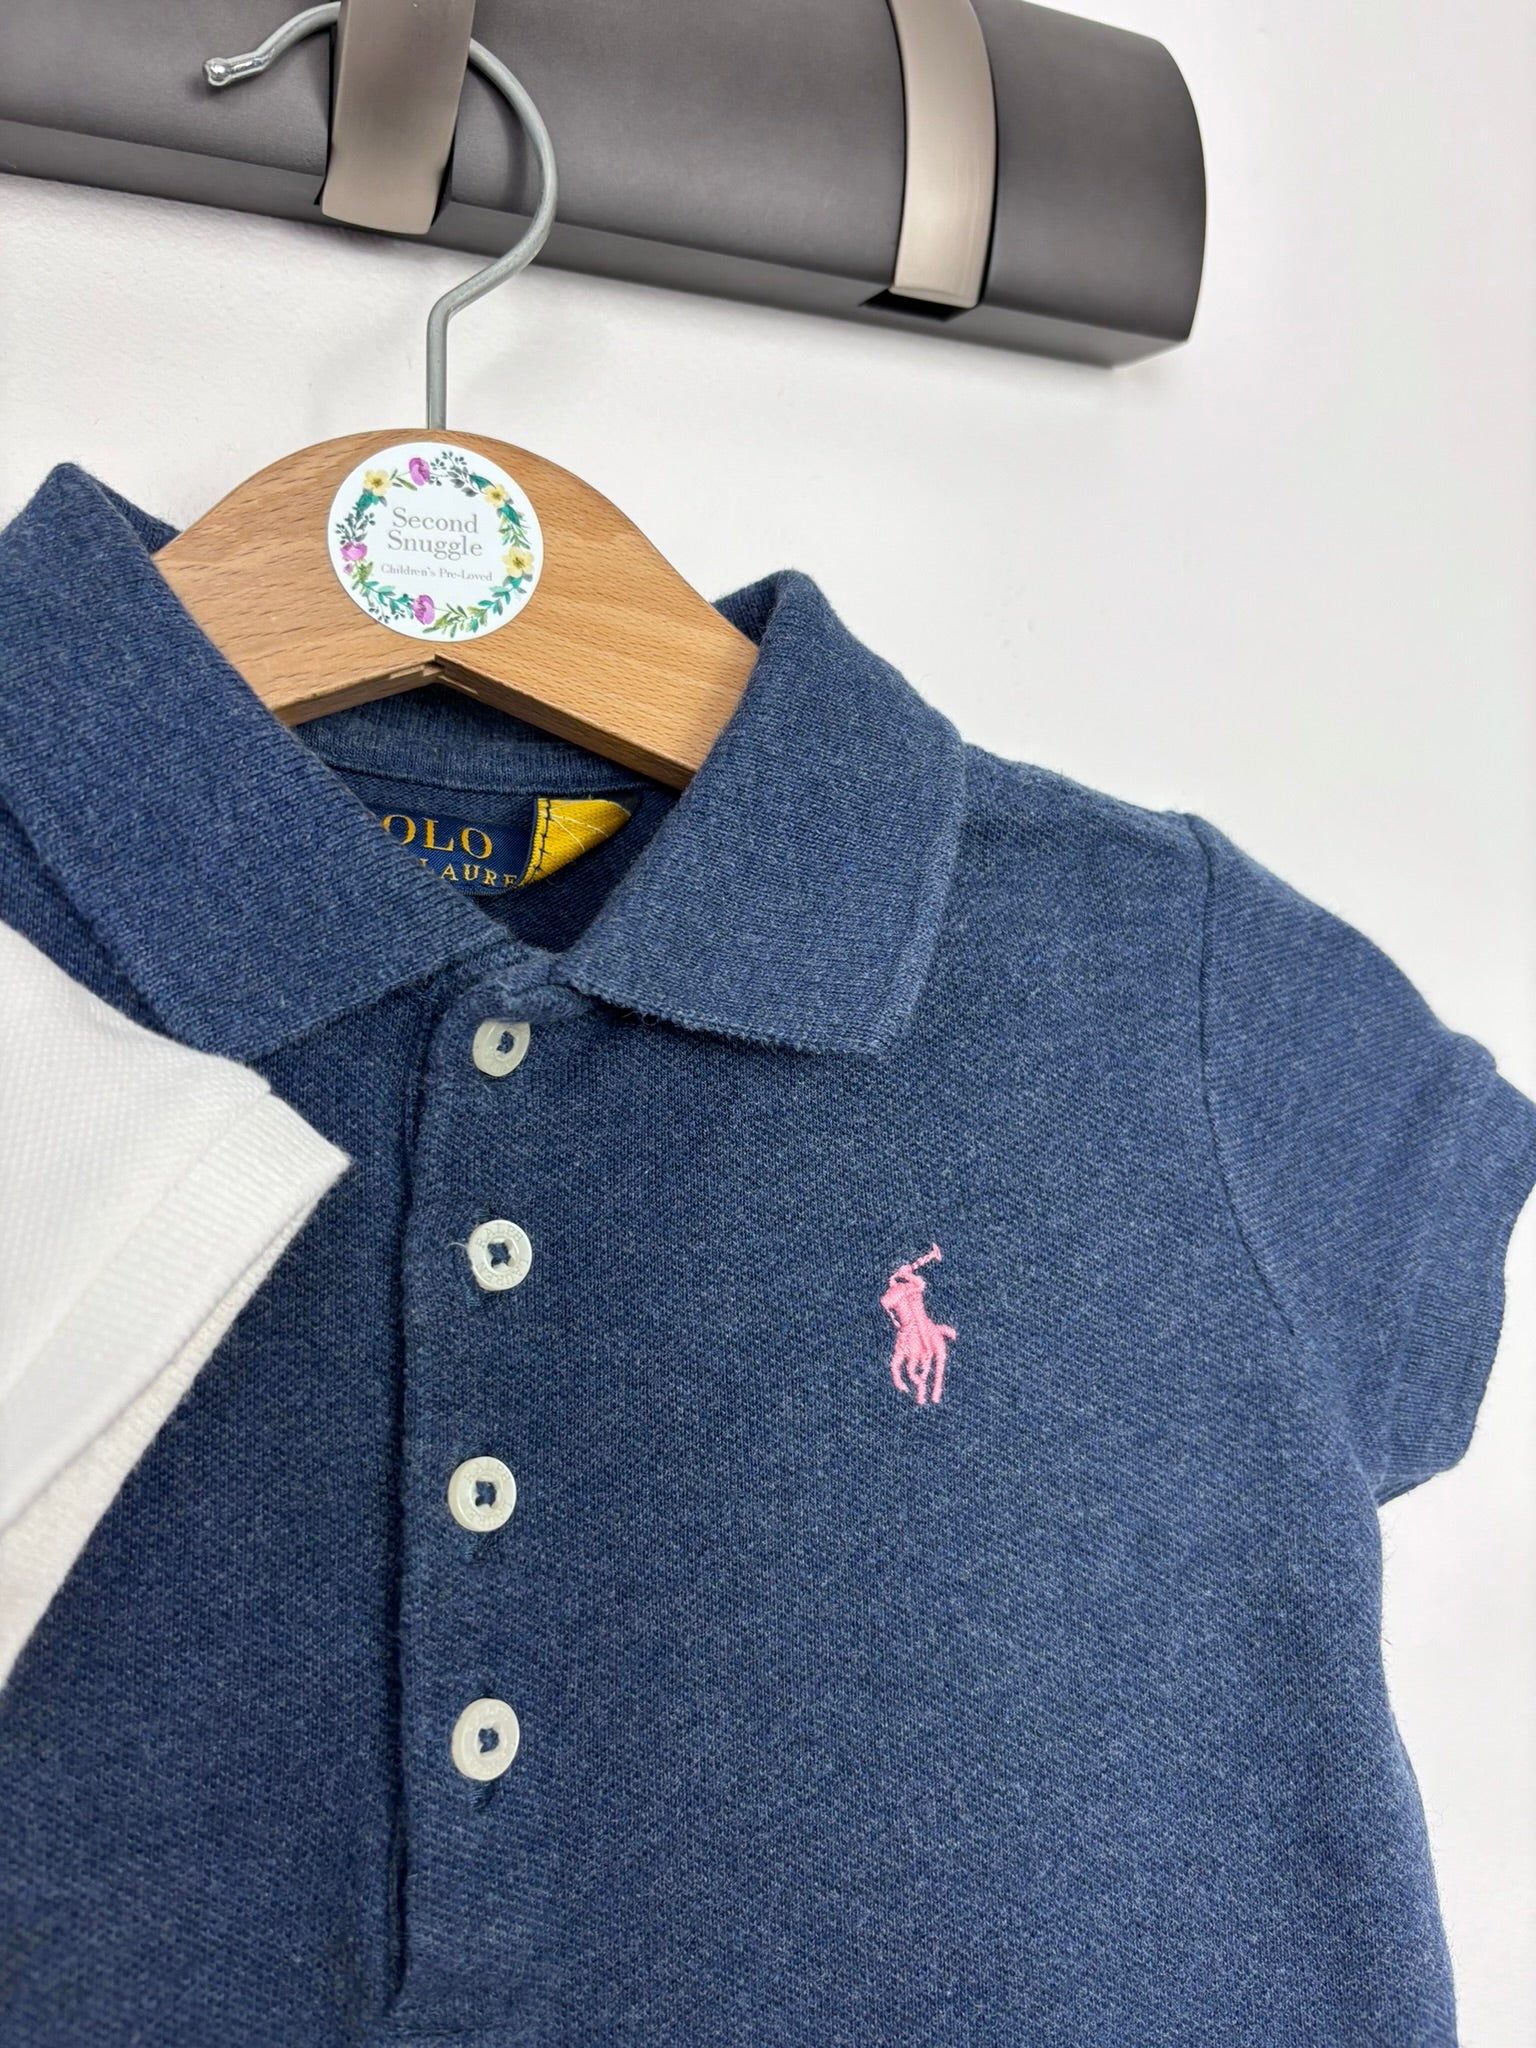 Ralph Lauren 2 Years - PLAY-Tops-Second Snuggle Preloved